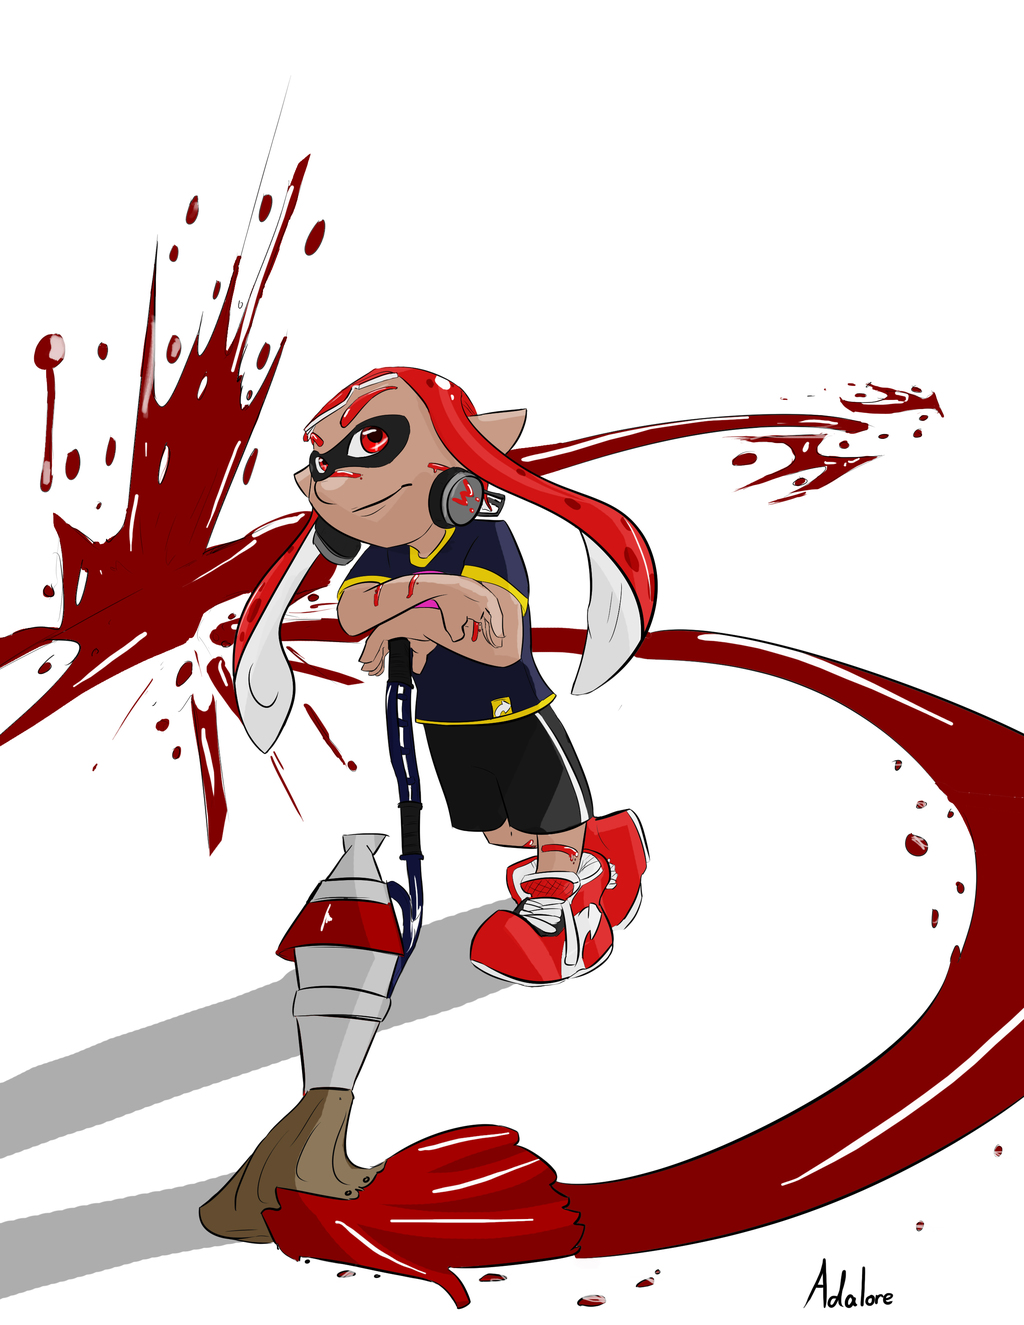 Commission - An INKLING of true power